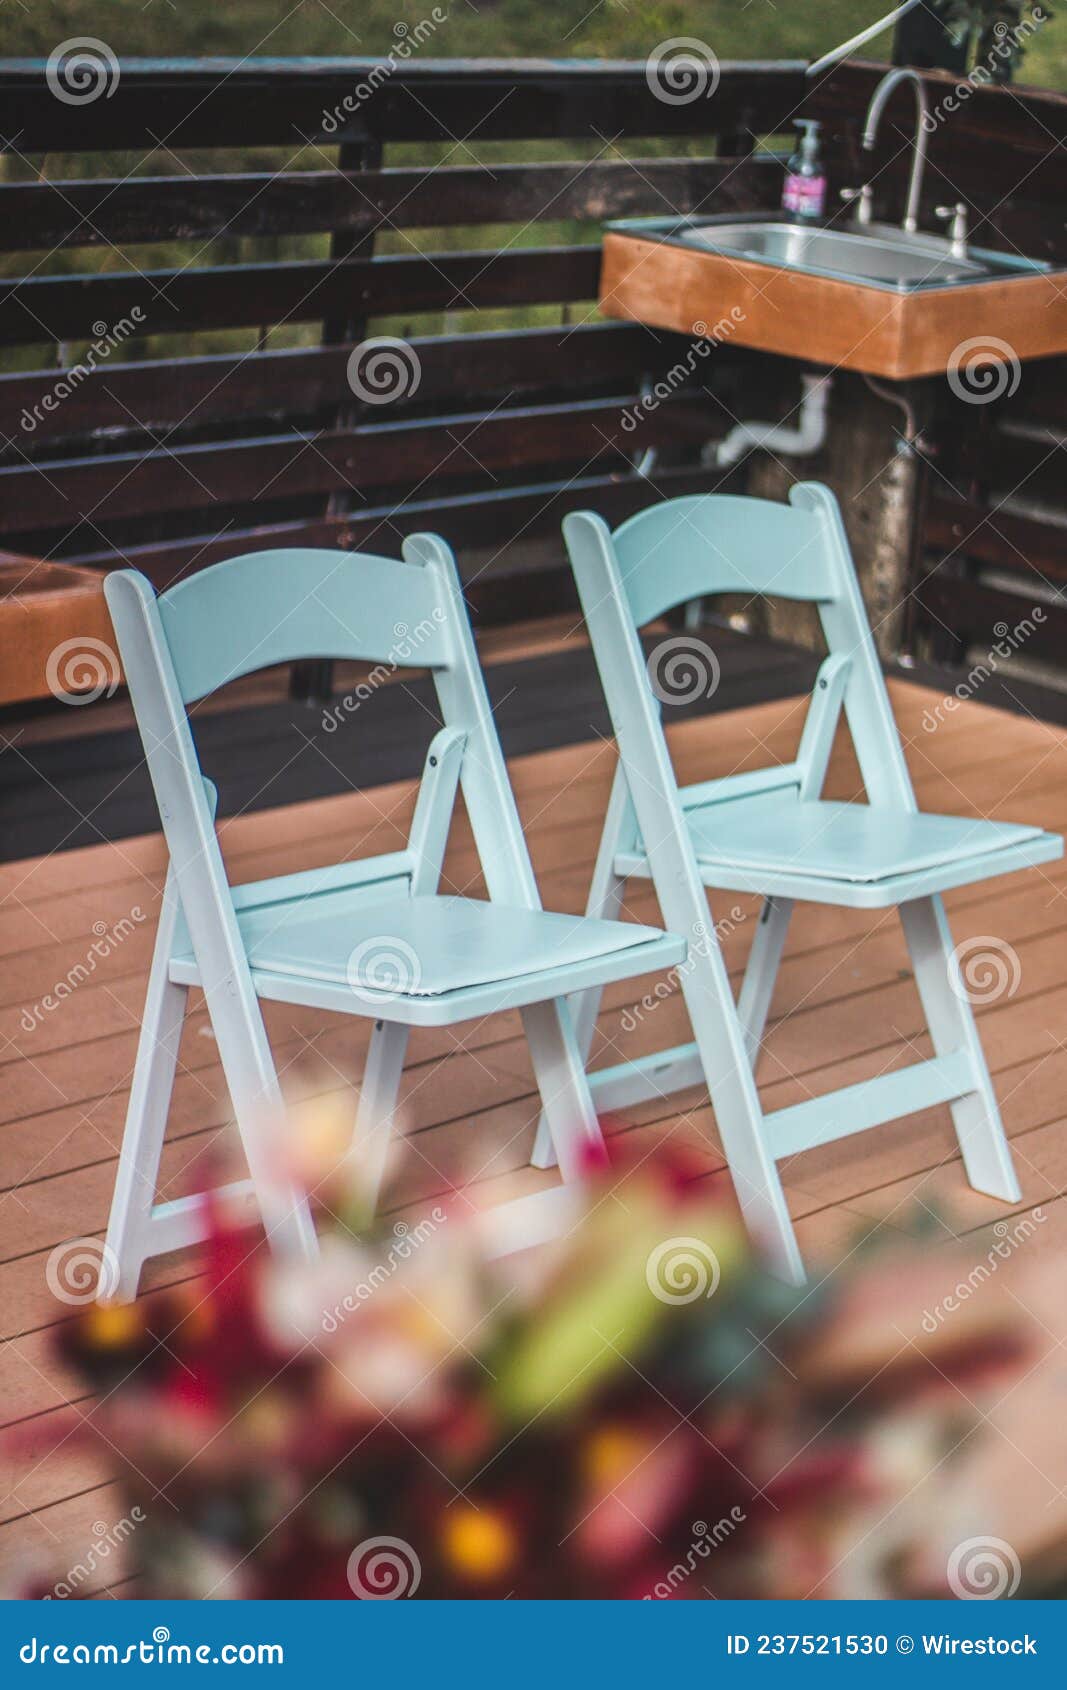 outdoor chairs for civil wedding